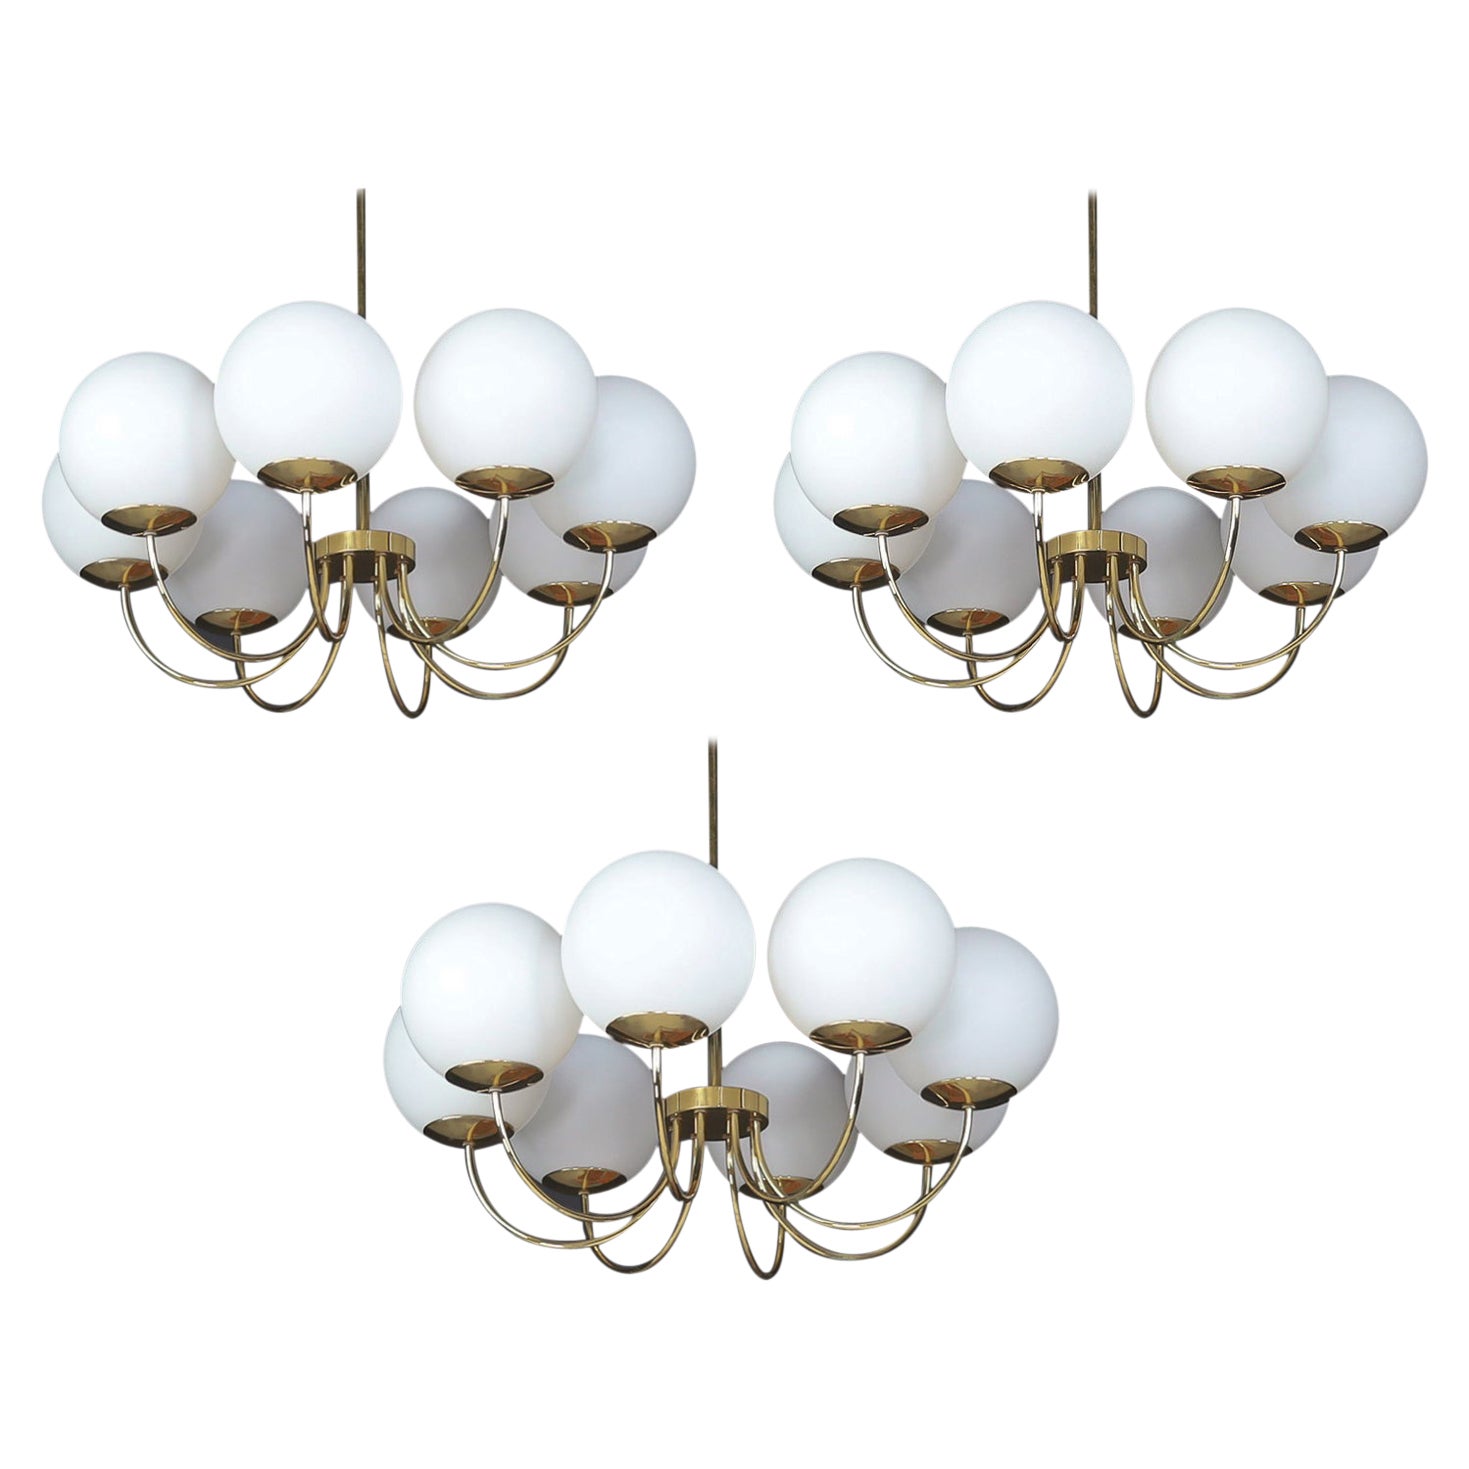 1 of 3 Elegant Chandeliers with Brass Fixture and Opaline Glass Globes, 1960s For Sale